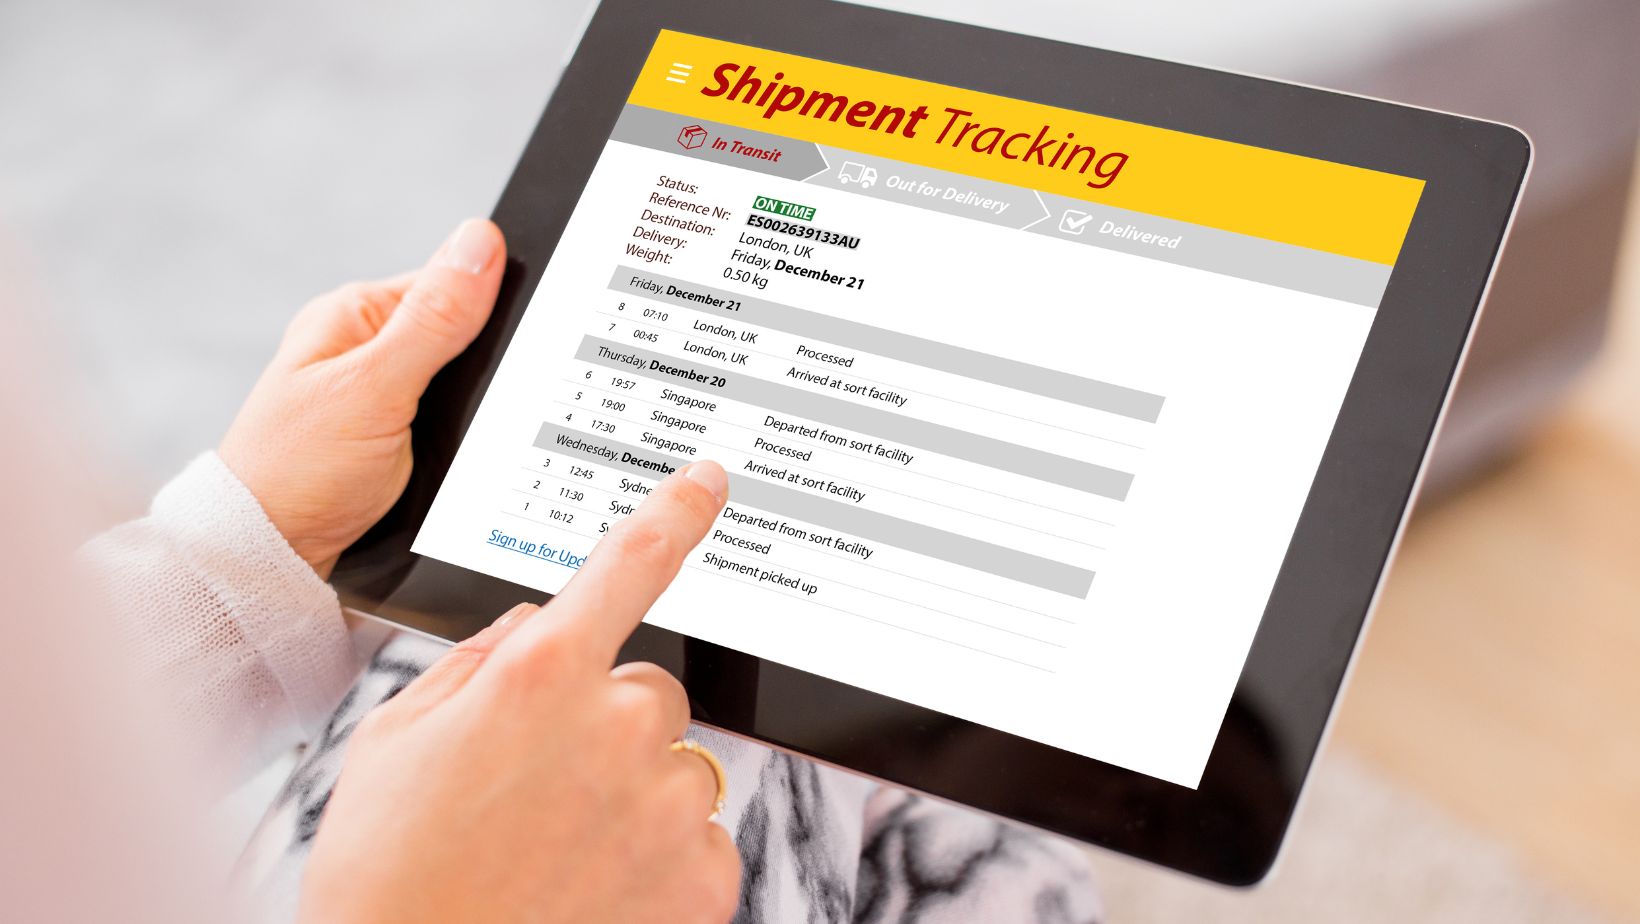 TKGM Parsel Sorgulama: How To Track Your Package And Get Real-Time Updates